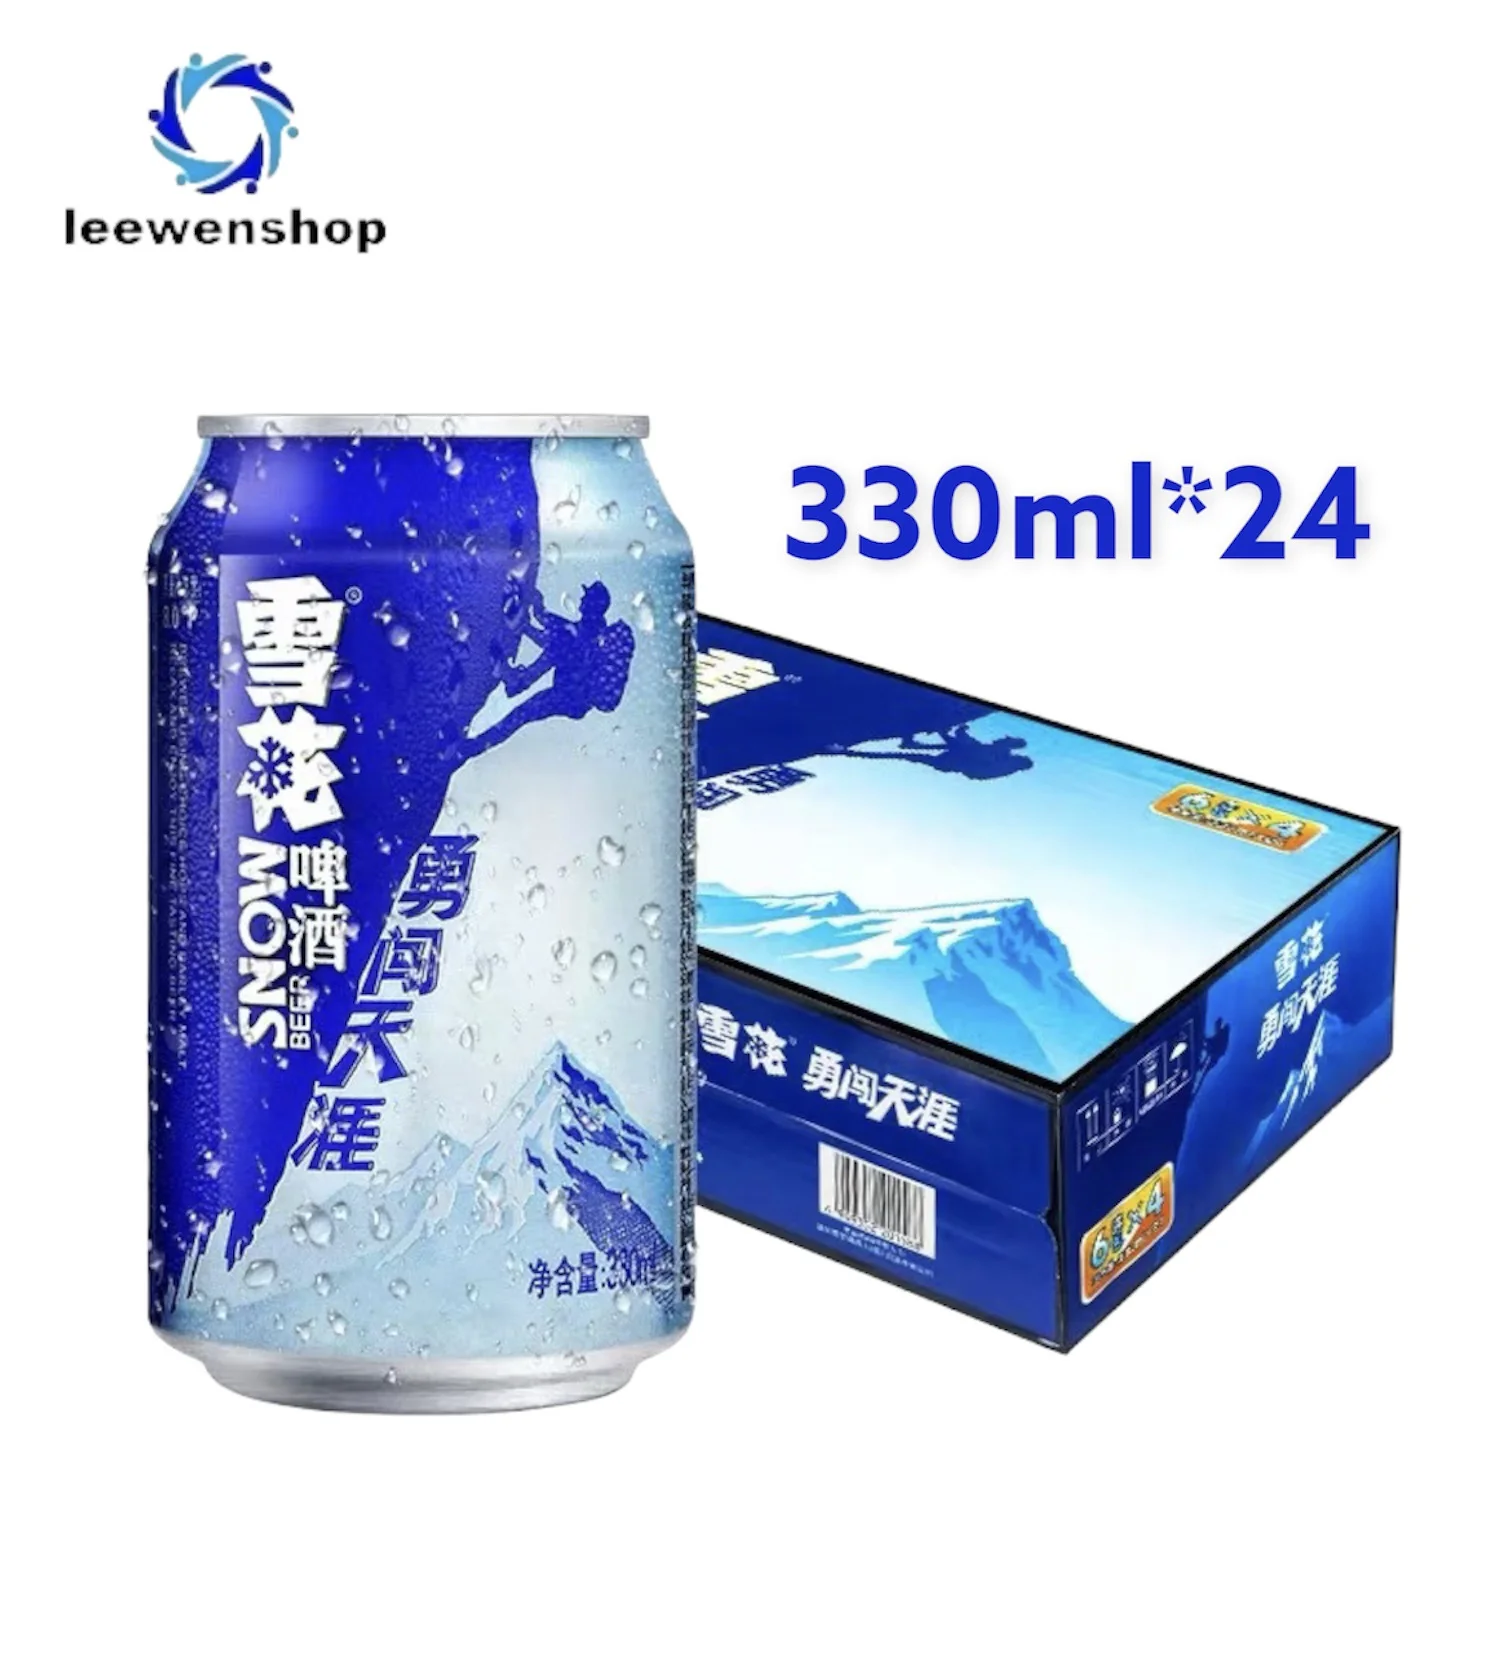 Canned Snow Beer 330ml 1 * 24 can